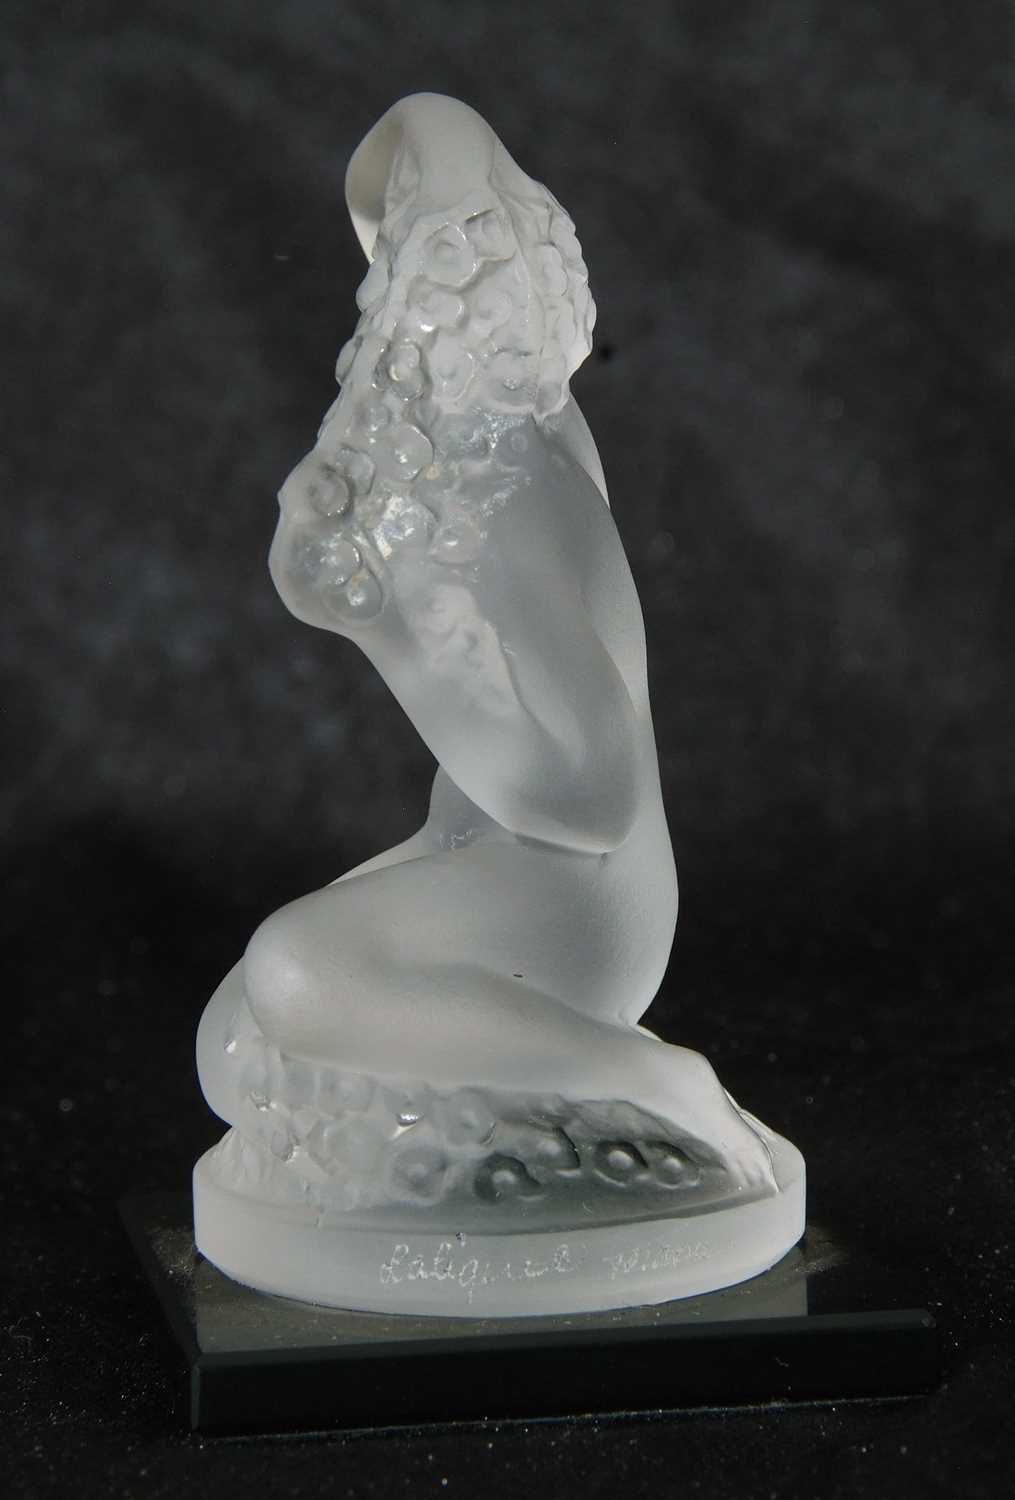 Small Lalique model of a nude lady crouching on circular base, mounted on a black glass - Image 4 of 4